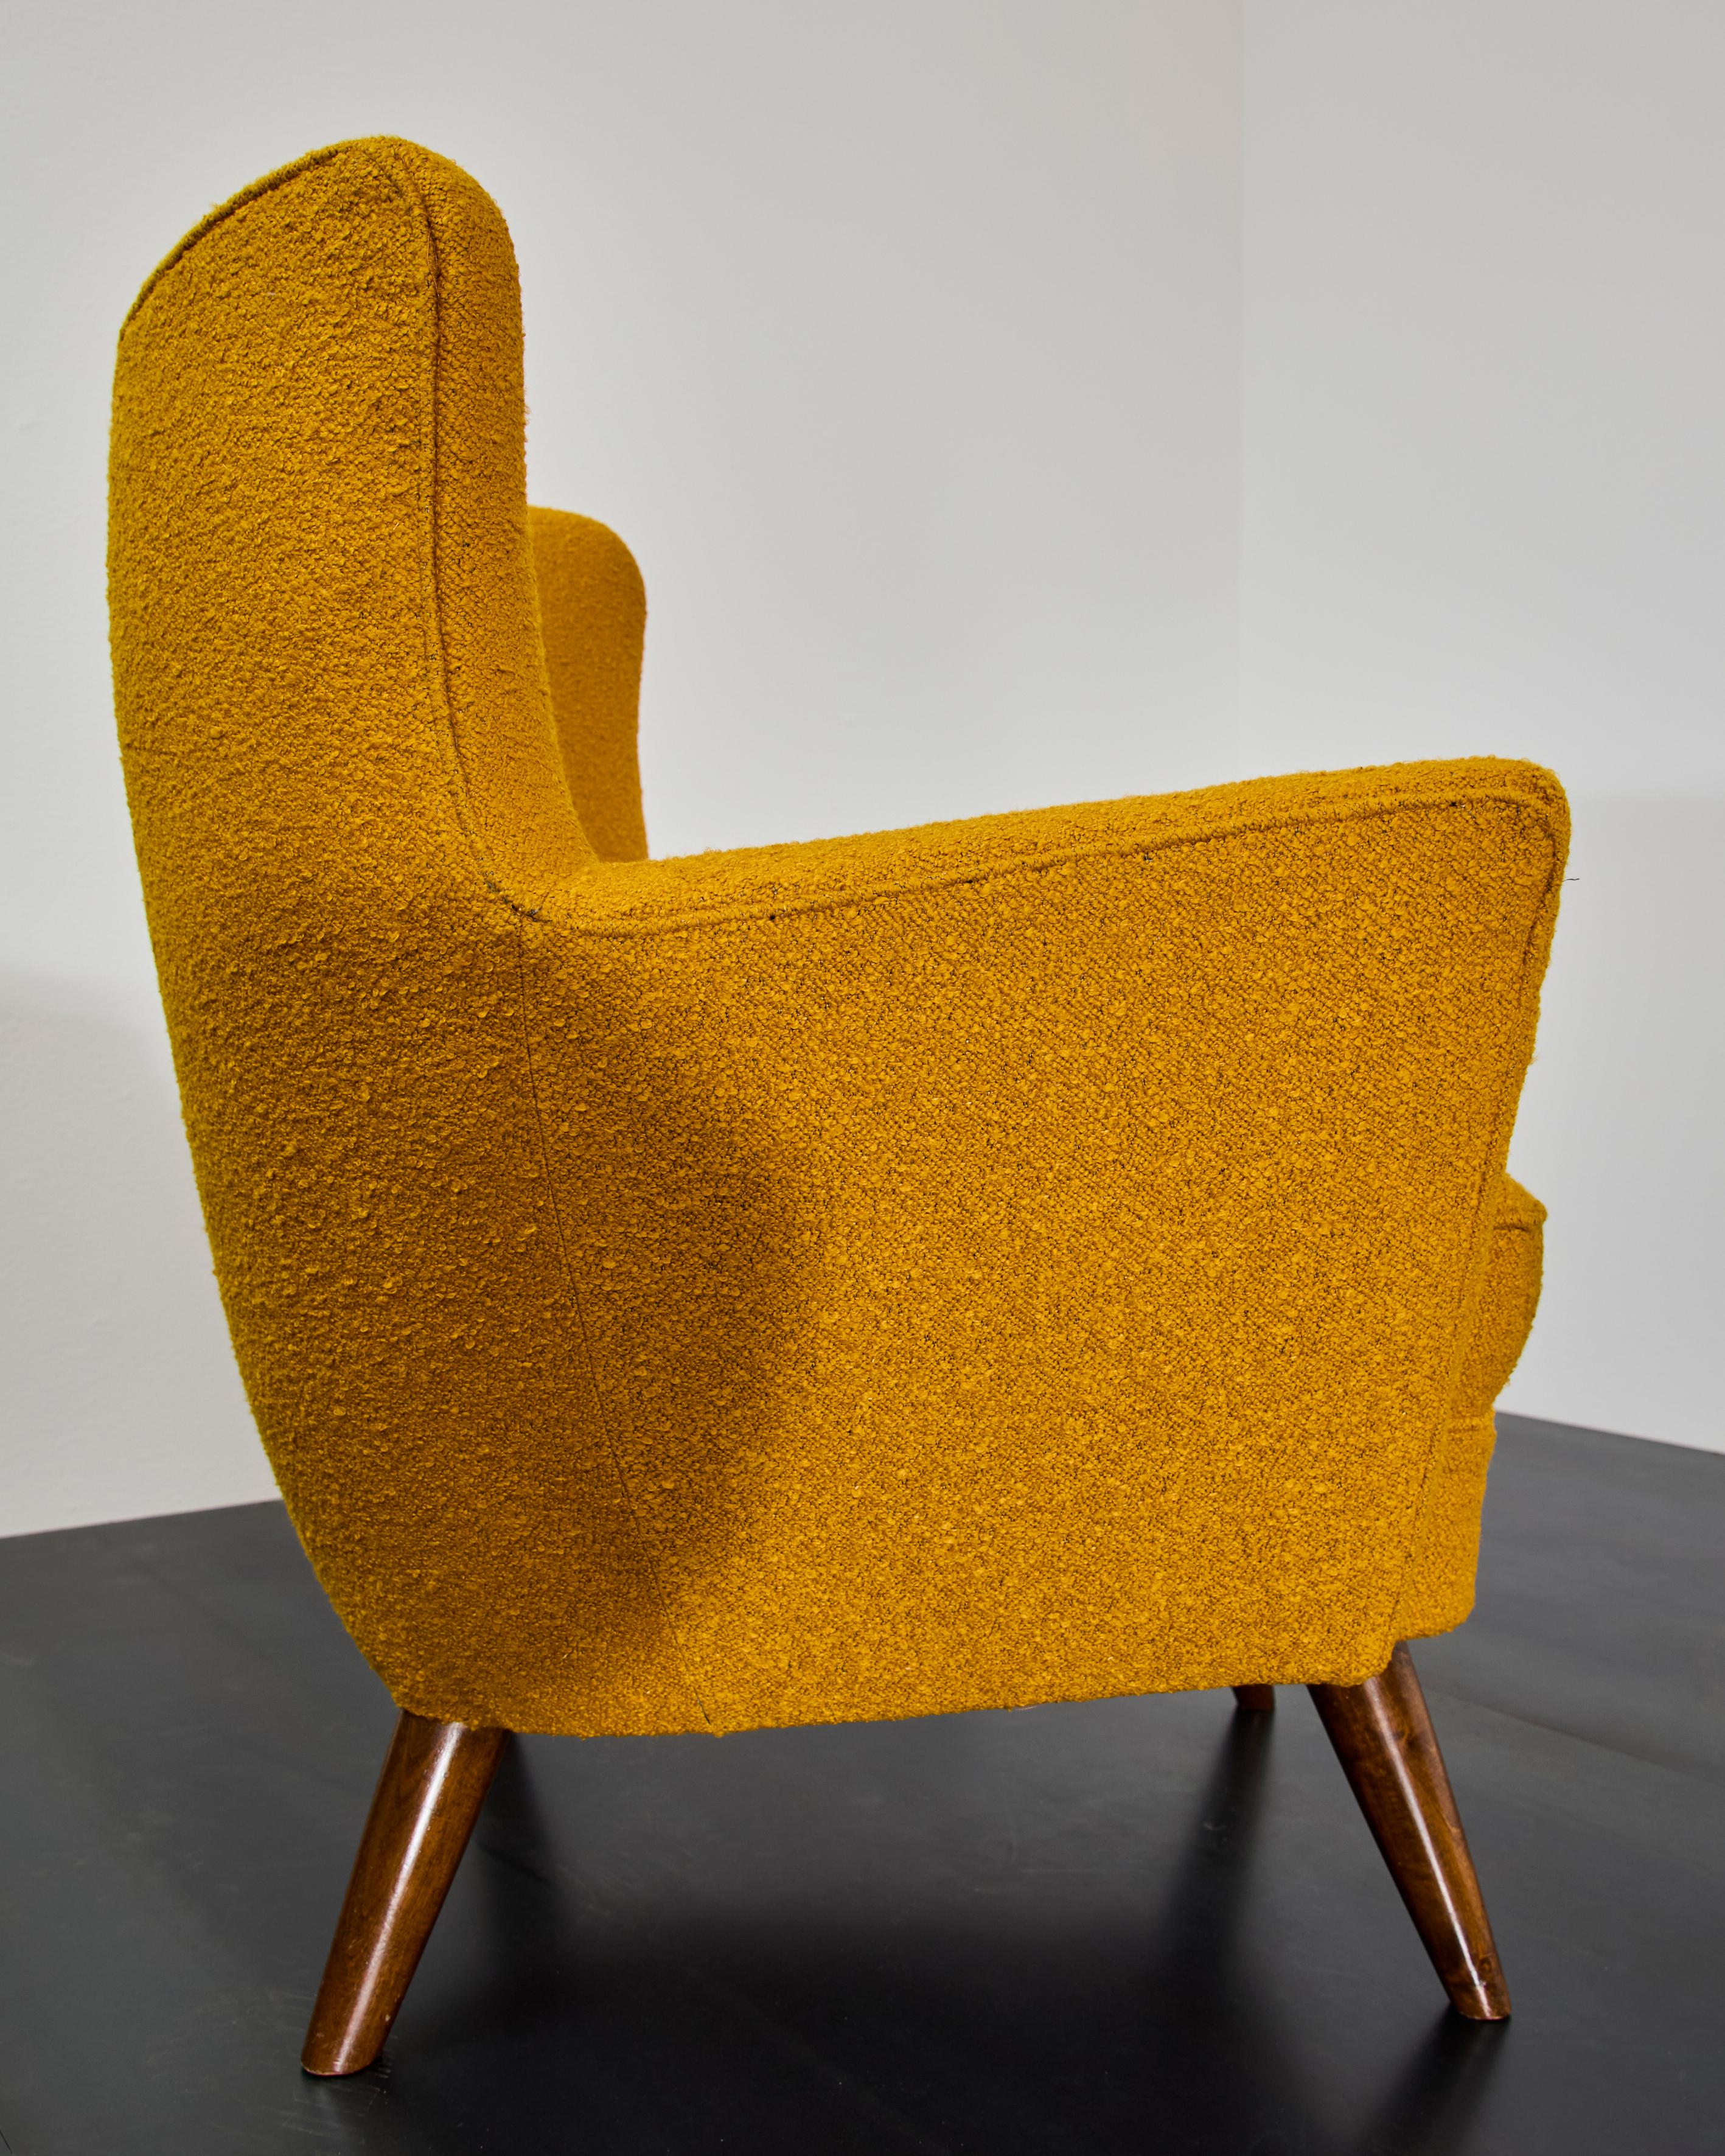 Pair of yellow armchairs designed by Luigi Caccia Dominioni in 1944 For Sale 4